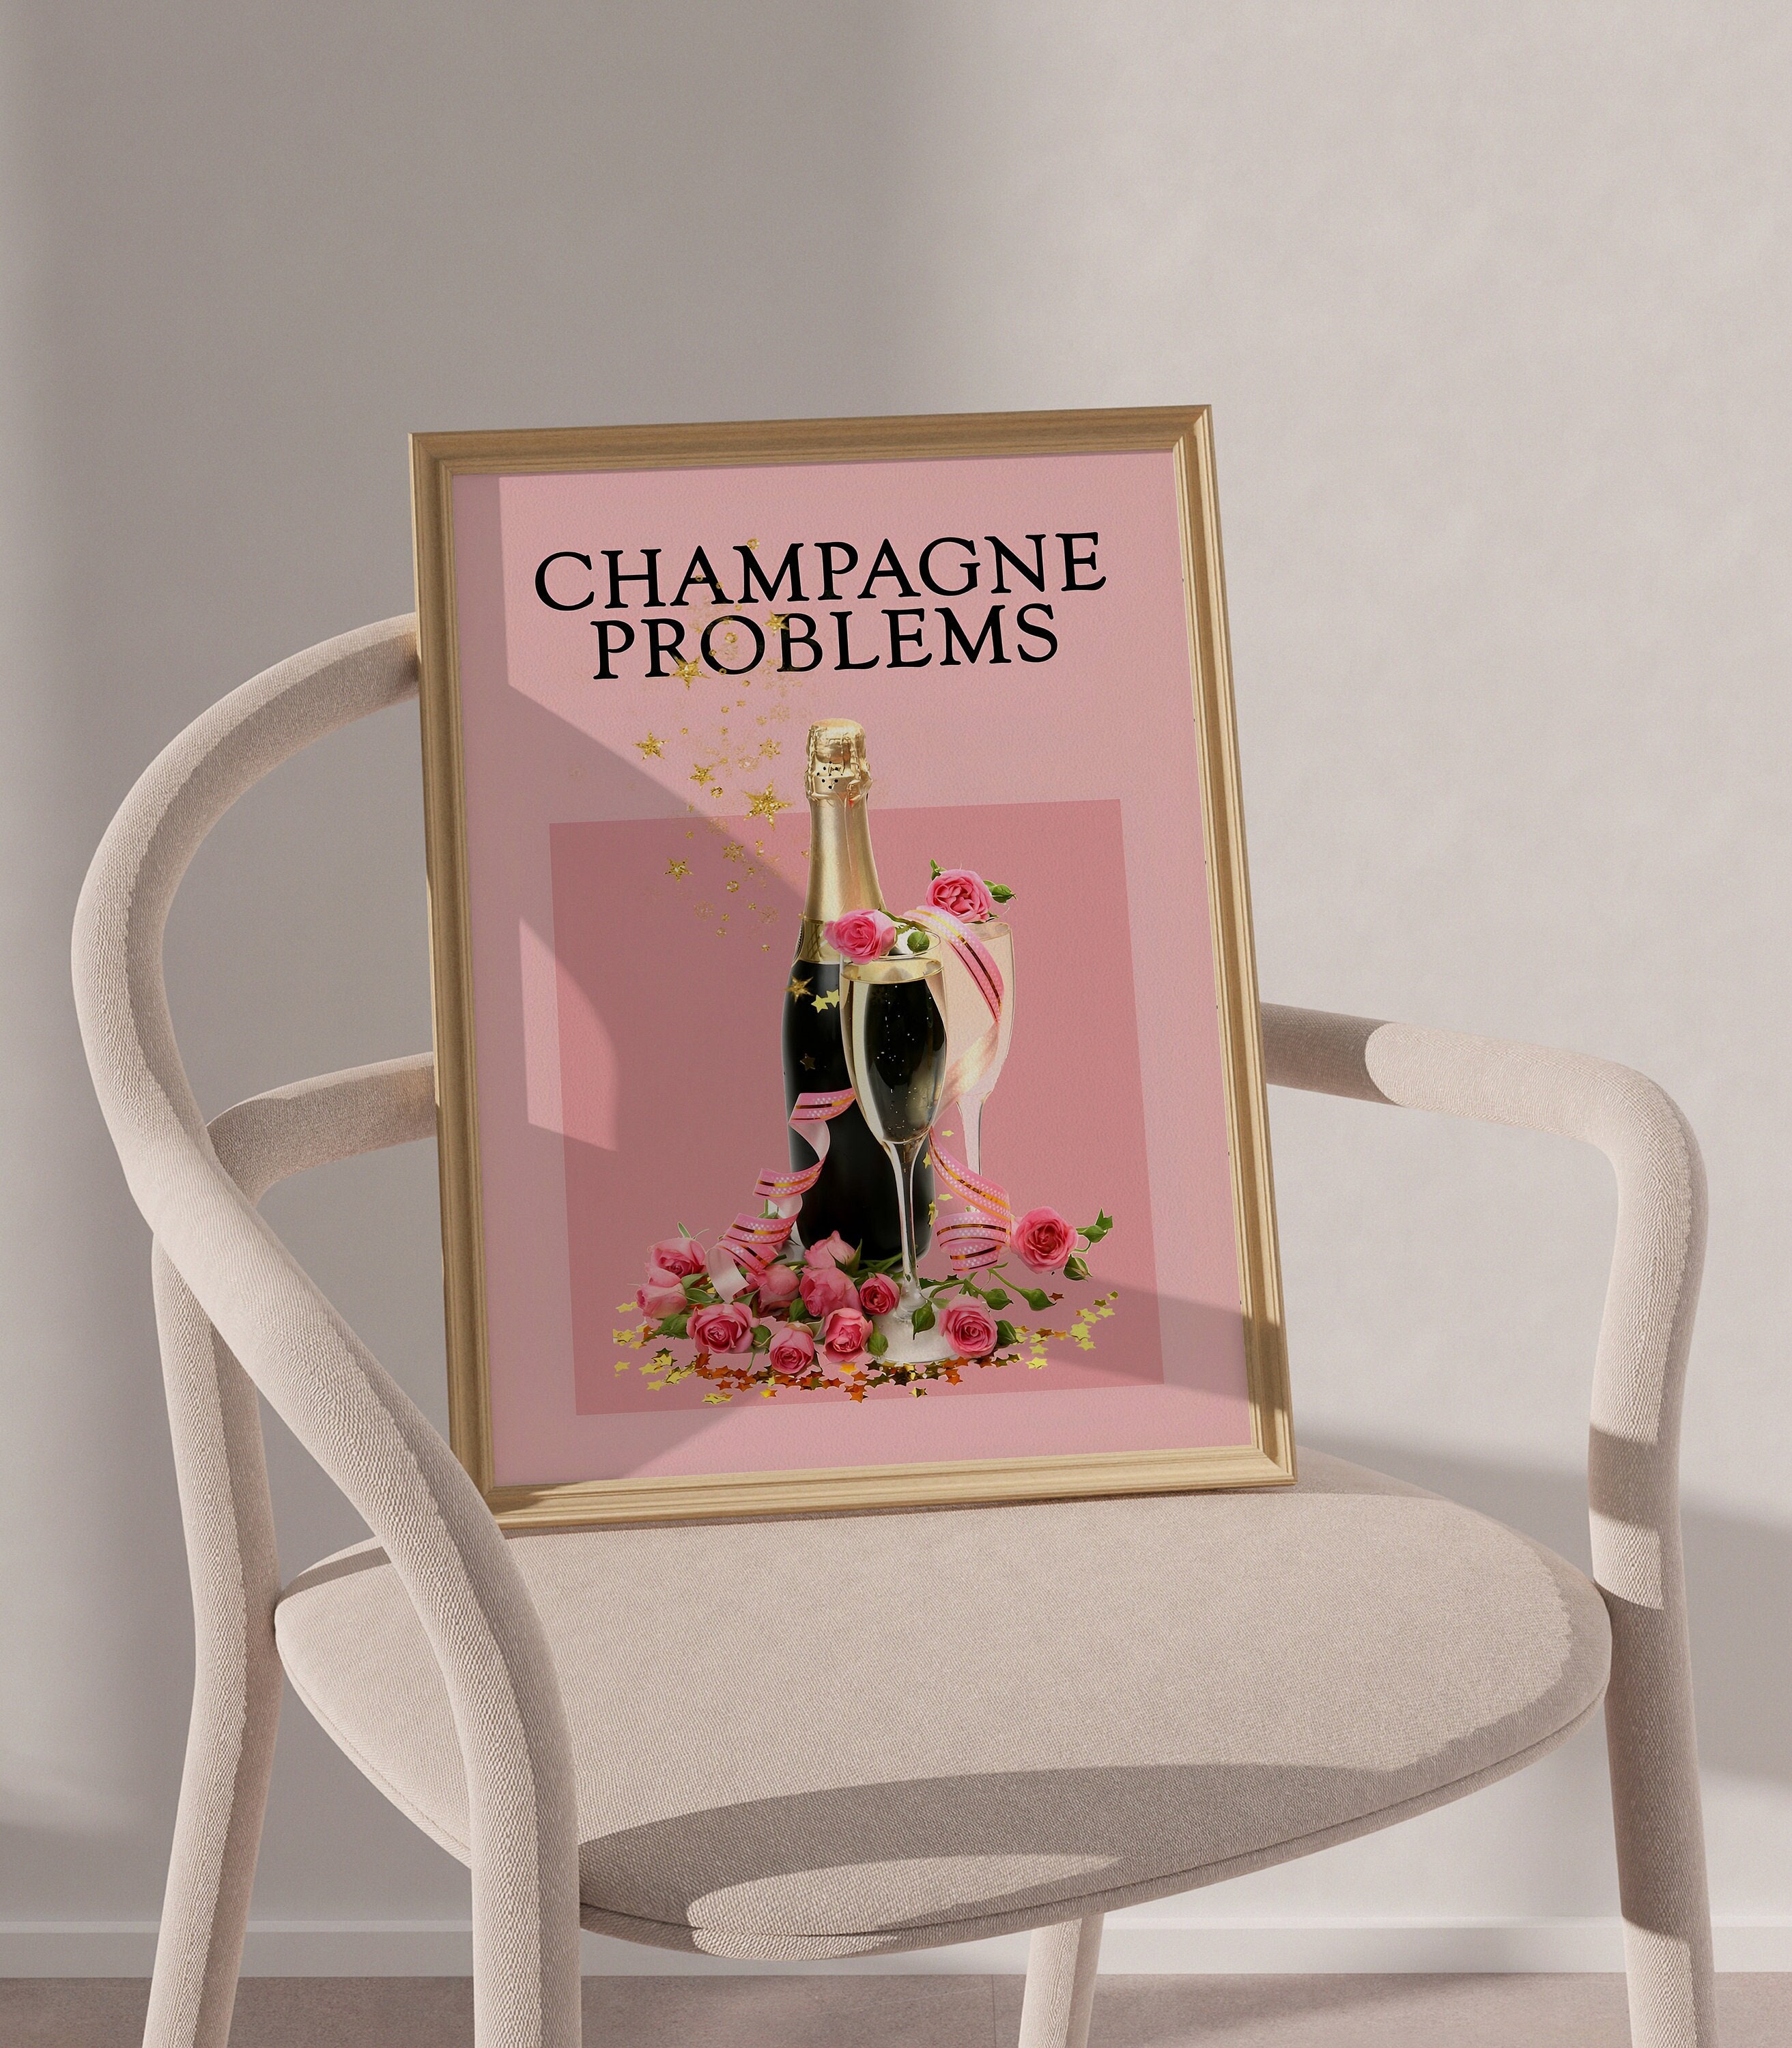 The Love Letter Library-Events  Champagne, Pink champagne, Moet chandon